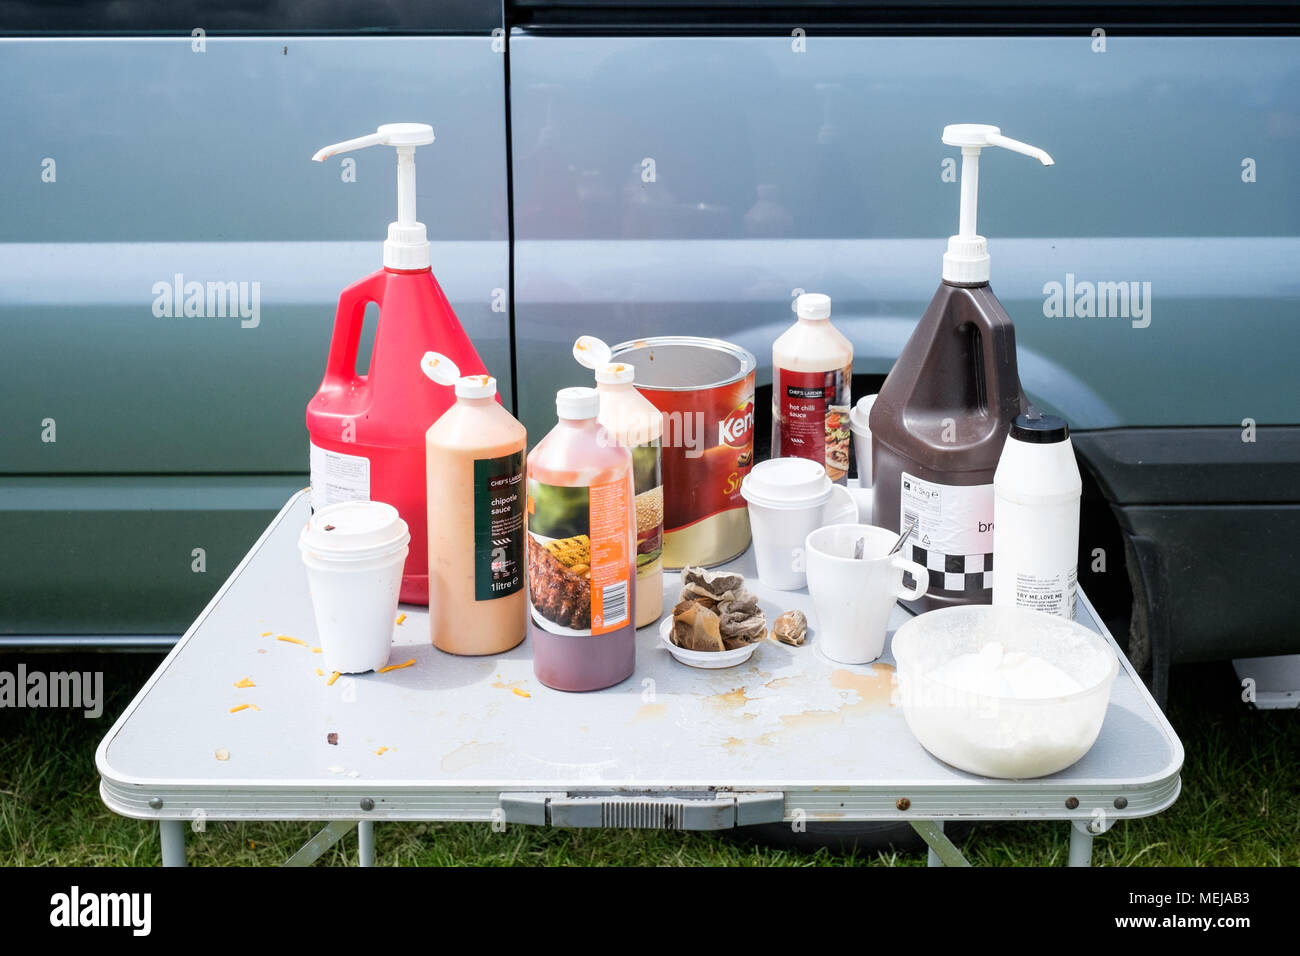 Very British condiments: sauces, used teabags and sugar on a table at a summer horse fair in County Durham England. Stock Photo